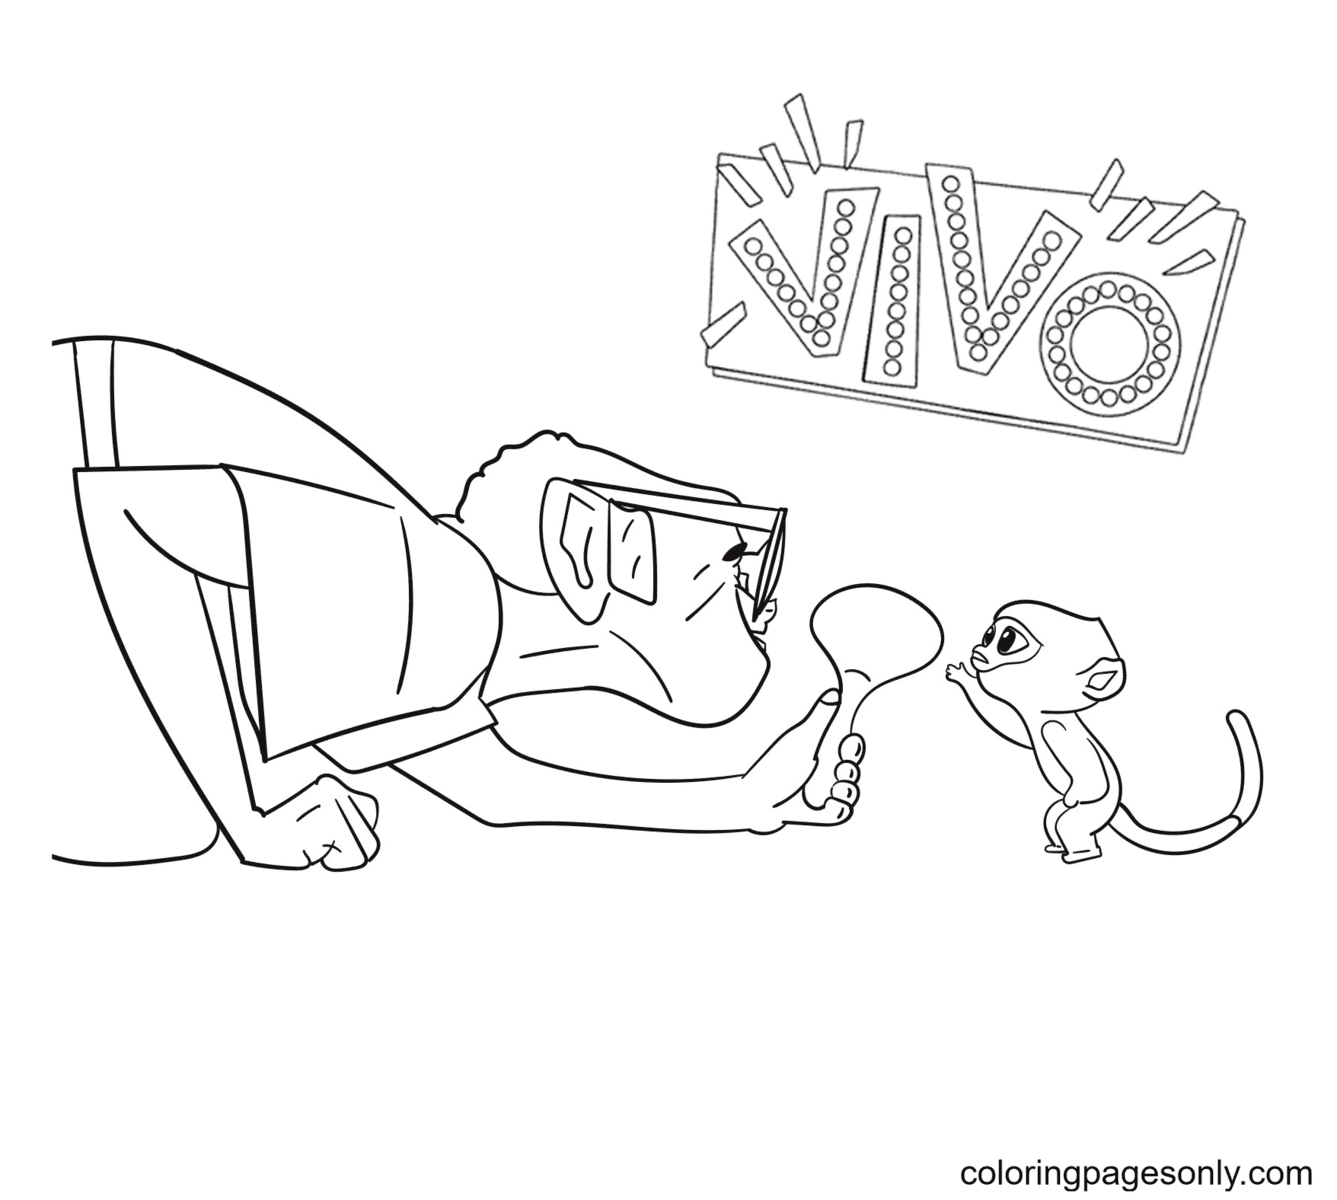 Andres meeting Vivo Coloring Page